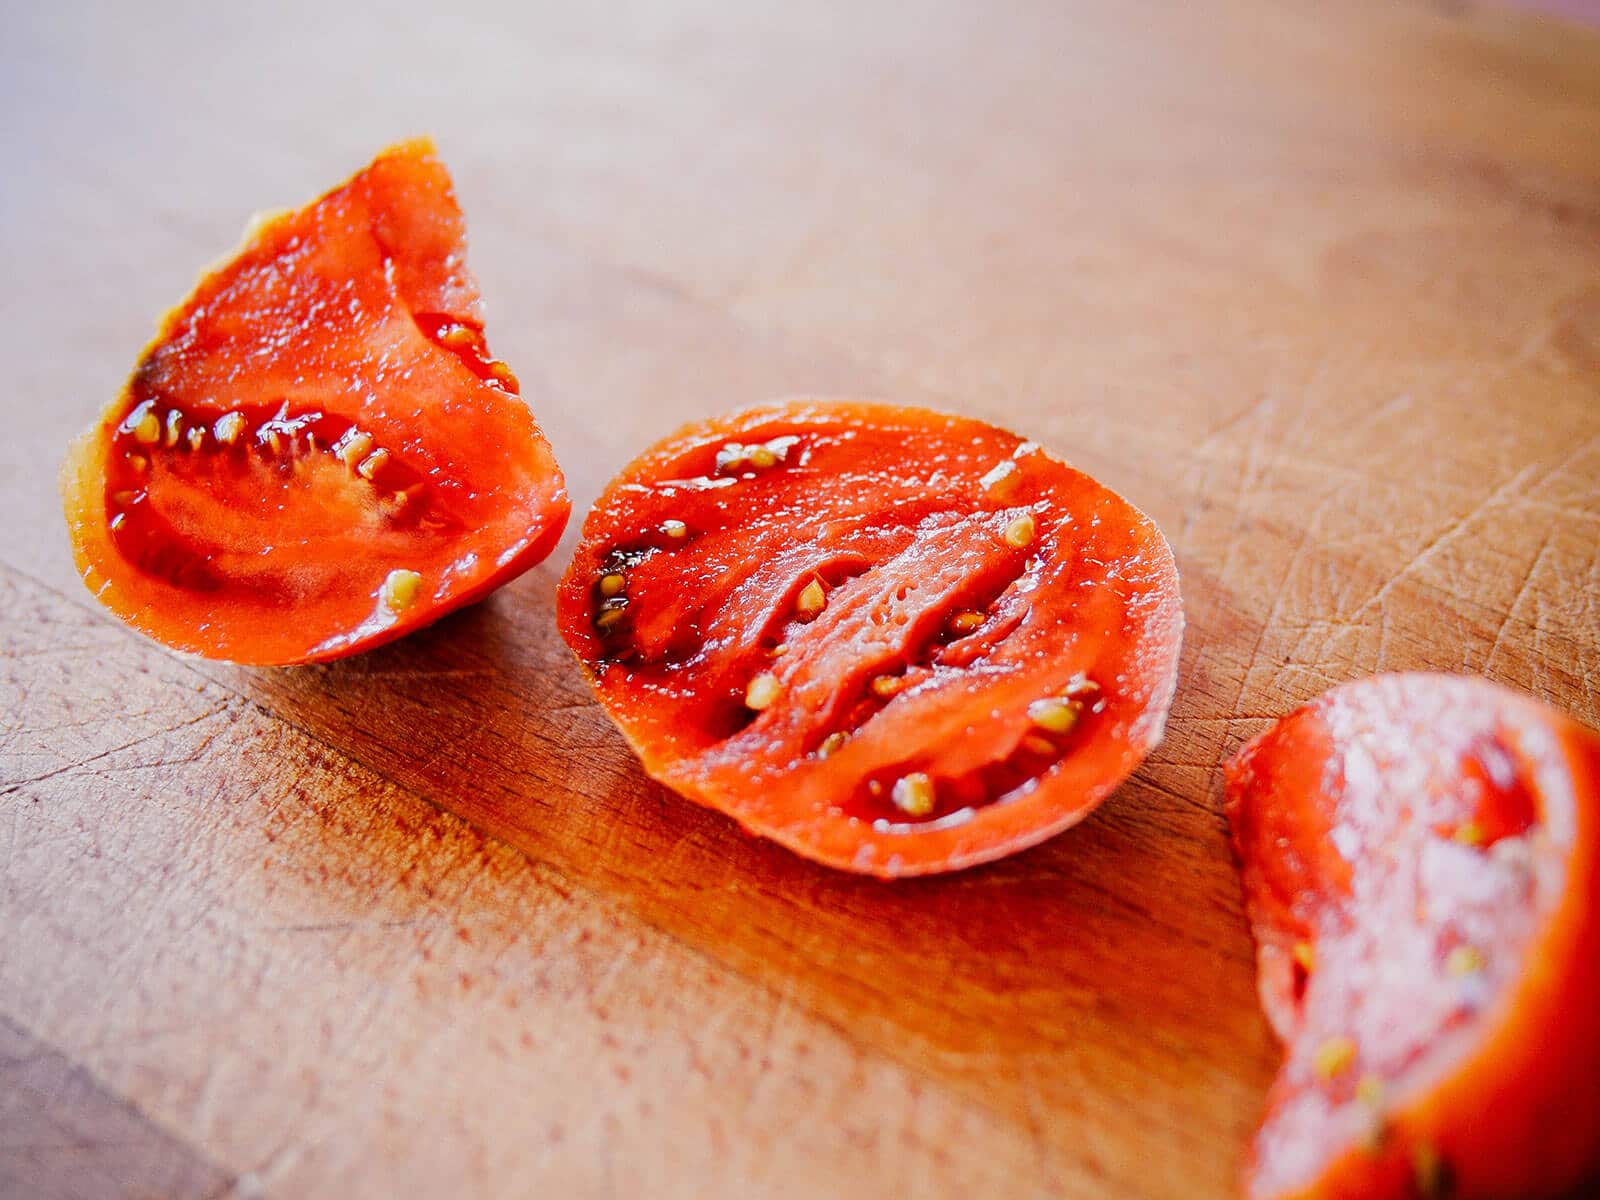 Slices of tomato showing seeds and pulp inside